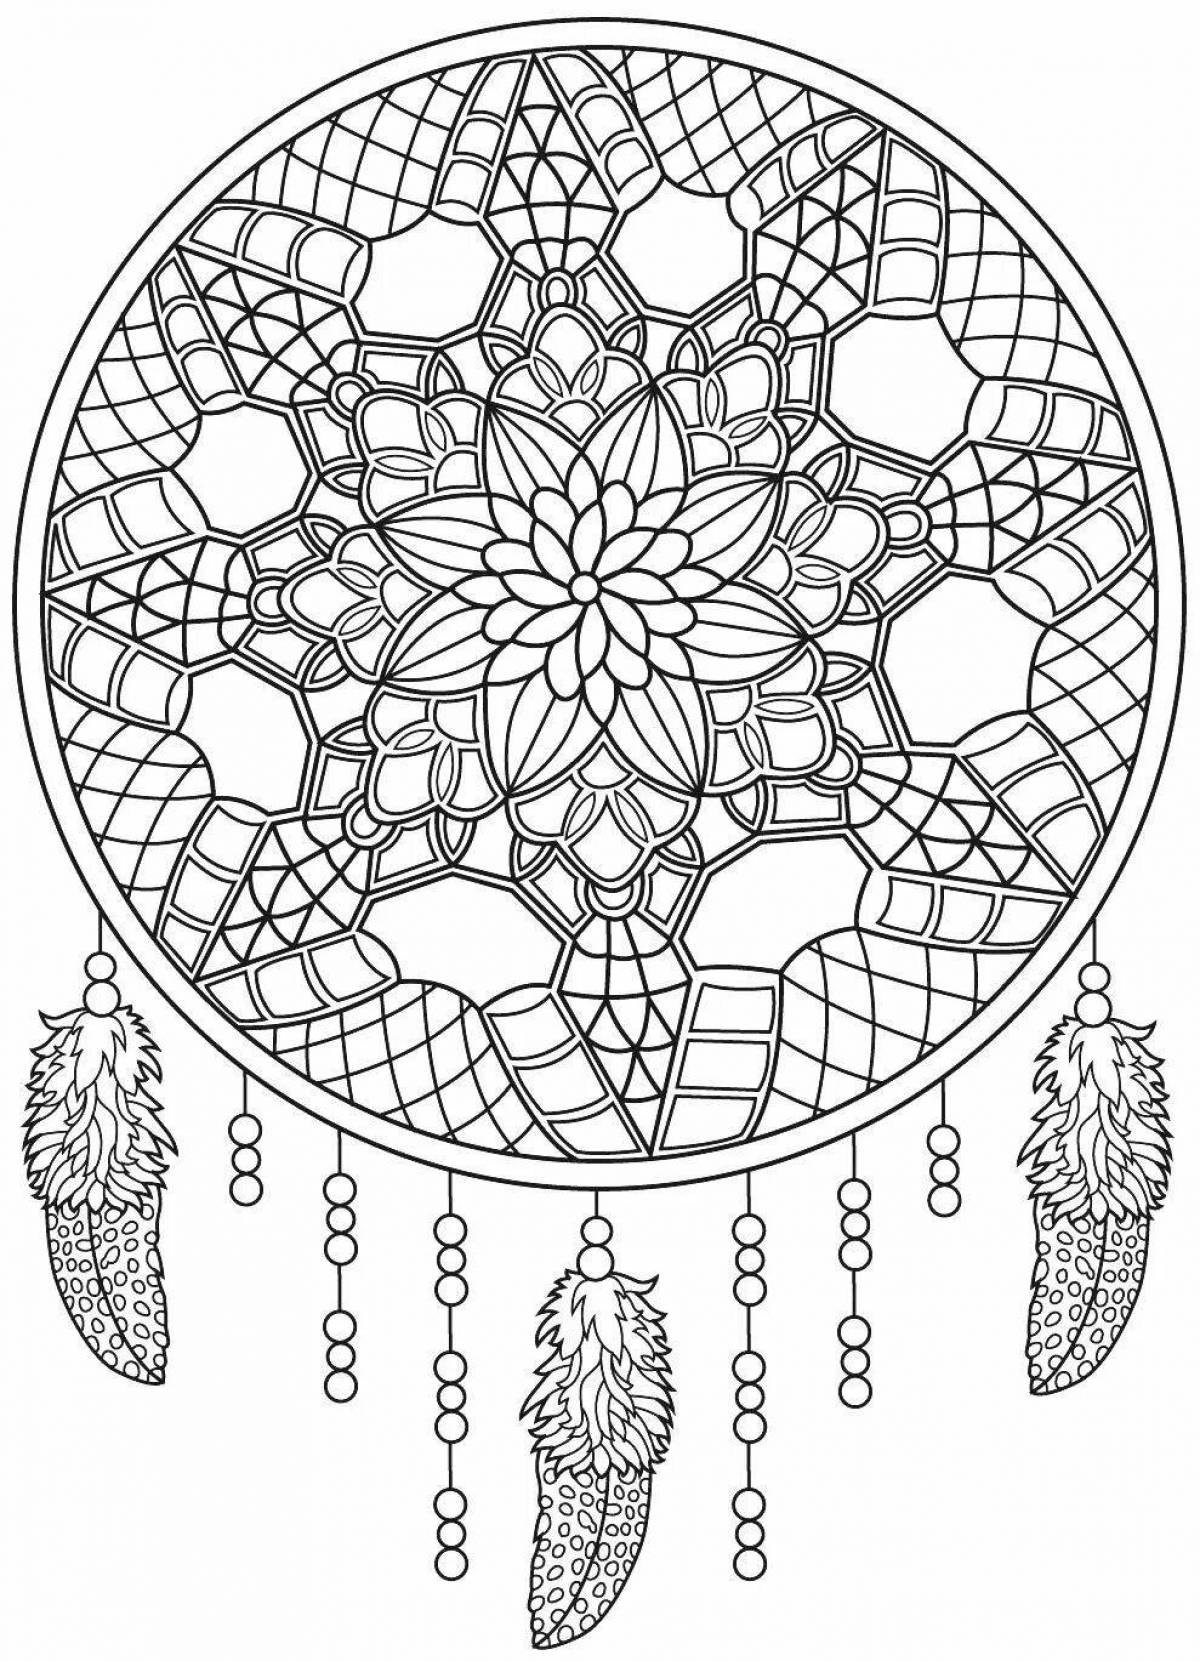 Exotic dreamcatcher coloring book